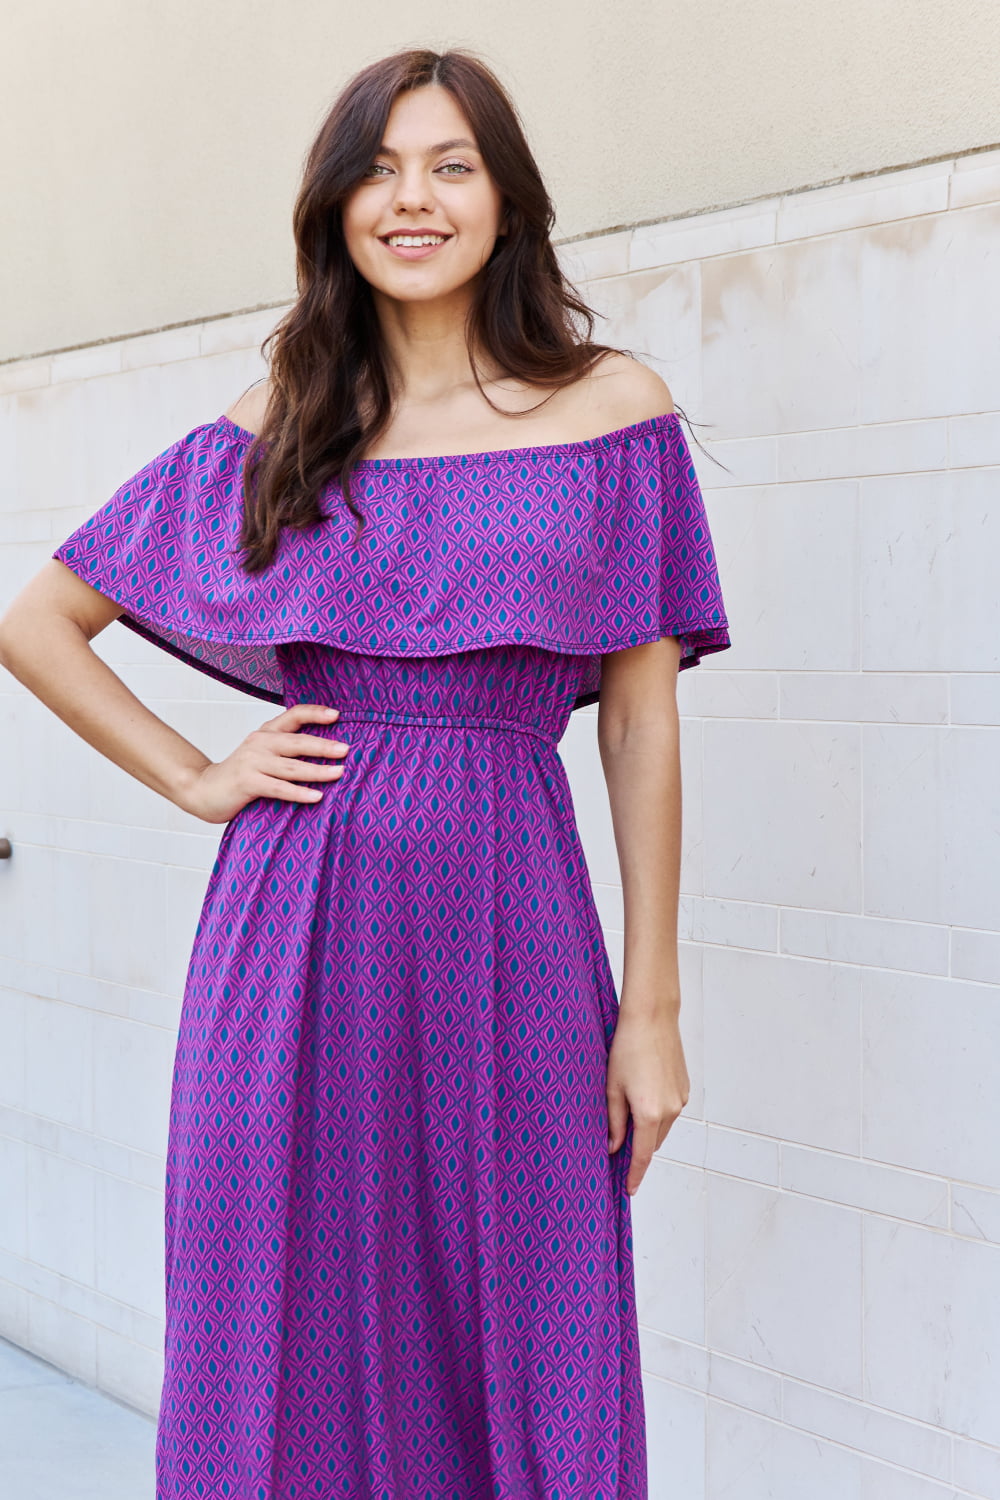 Uylees Boutique  My Best Angle Geometric Pattern Off The Shoulder Midi Dress in Purple